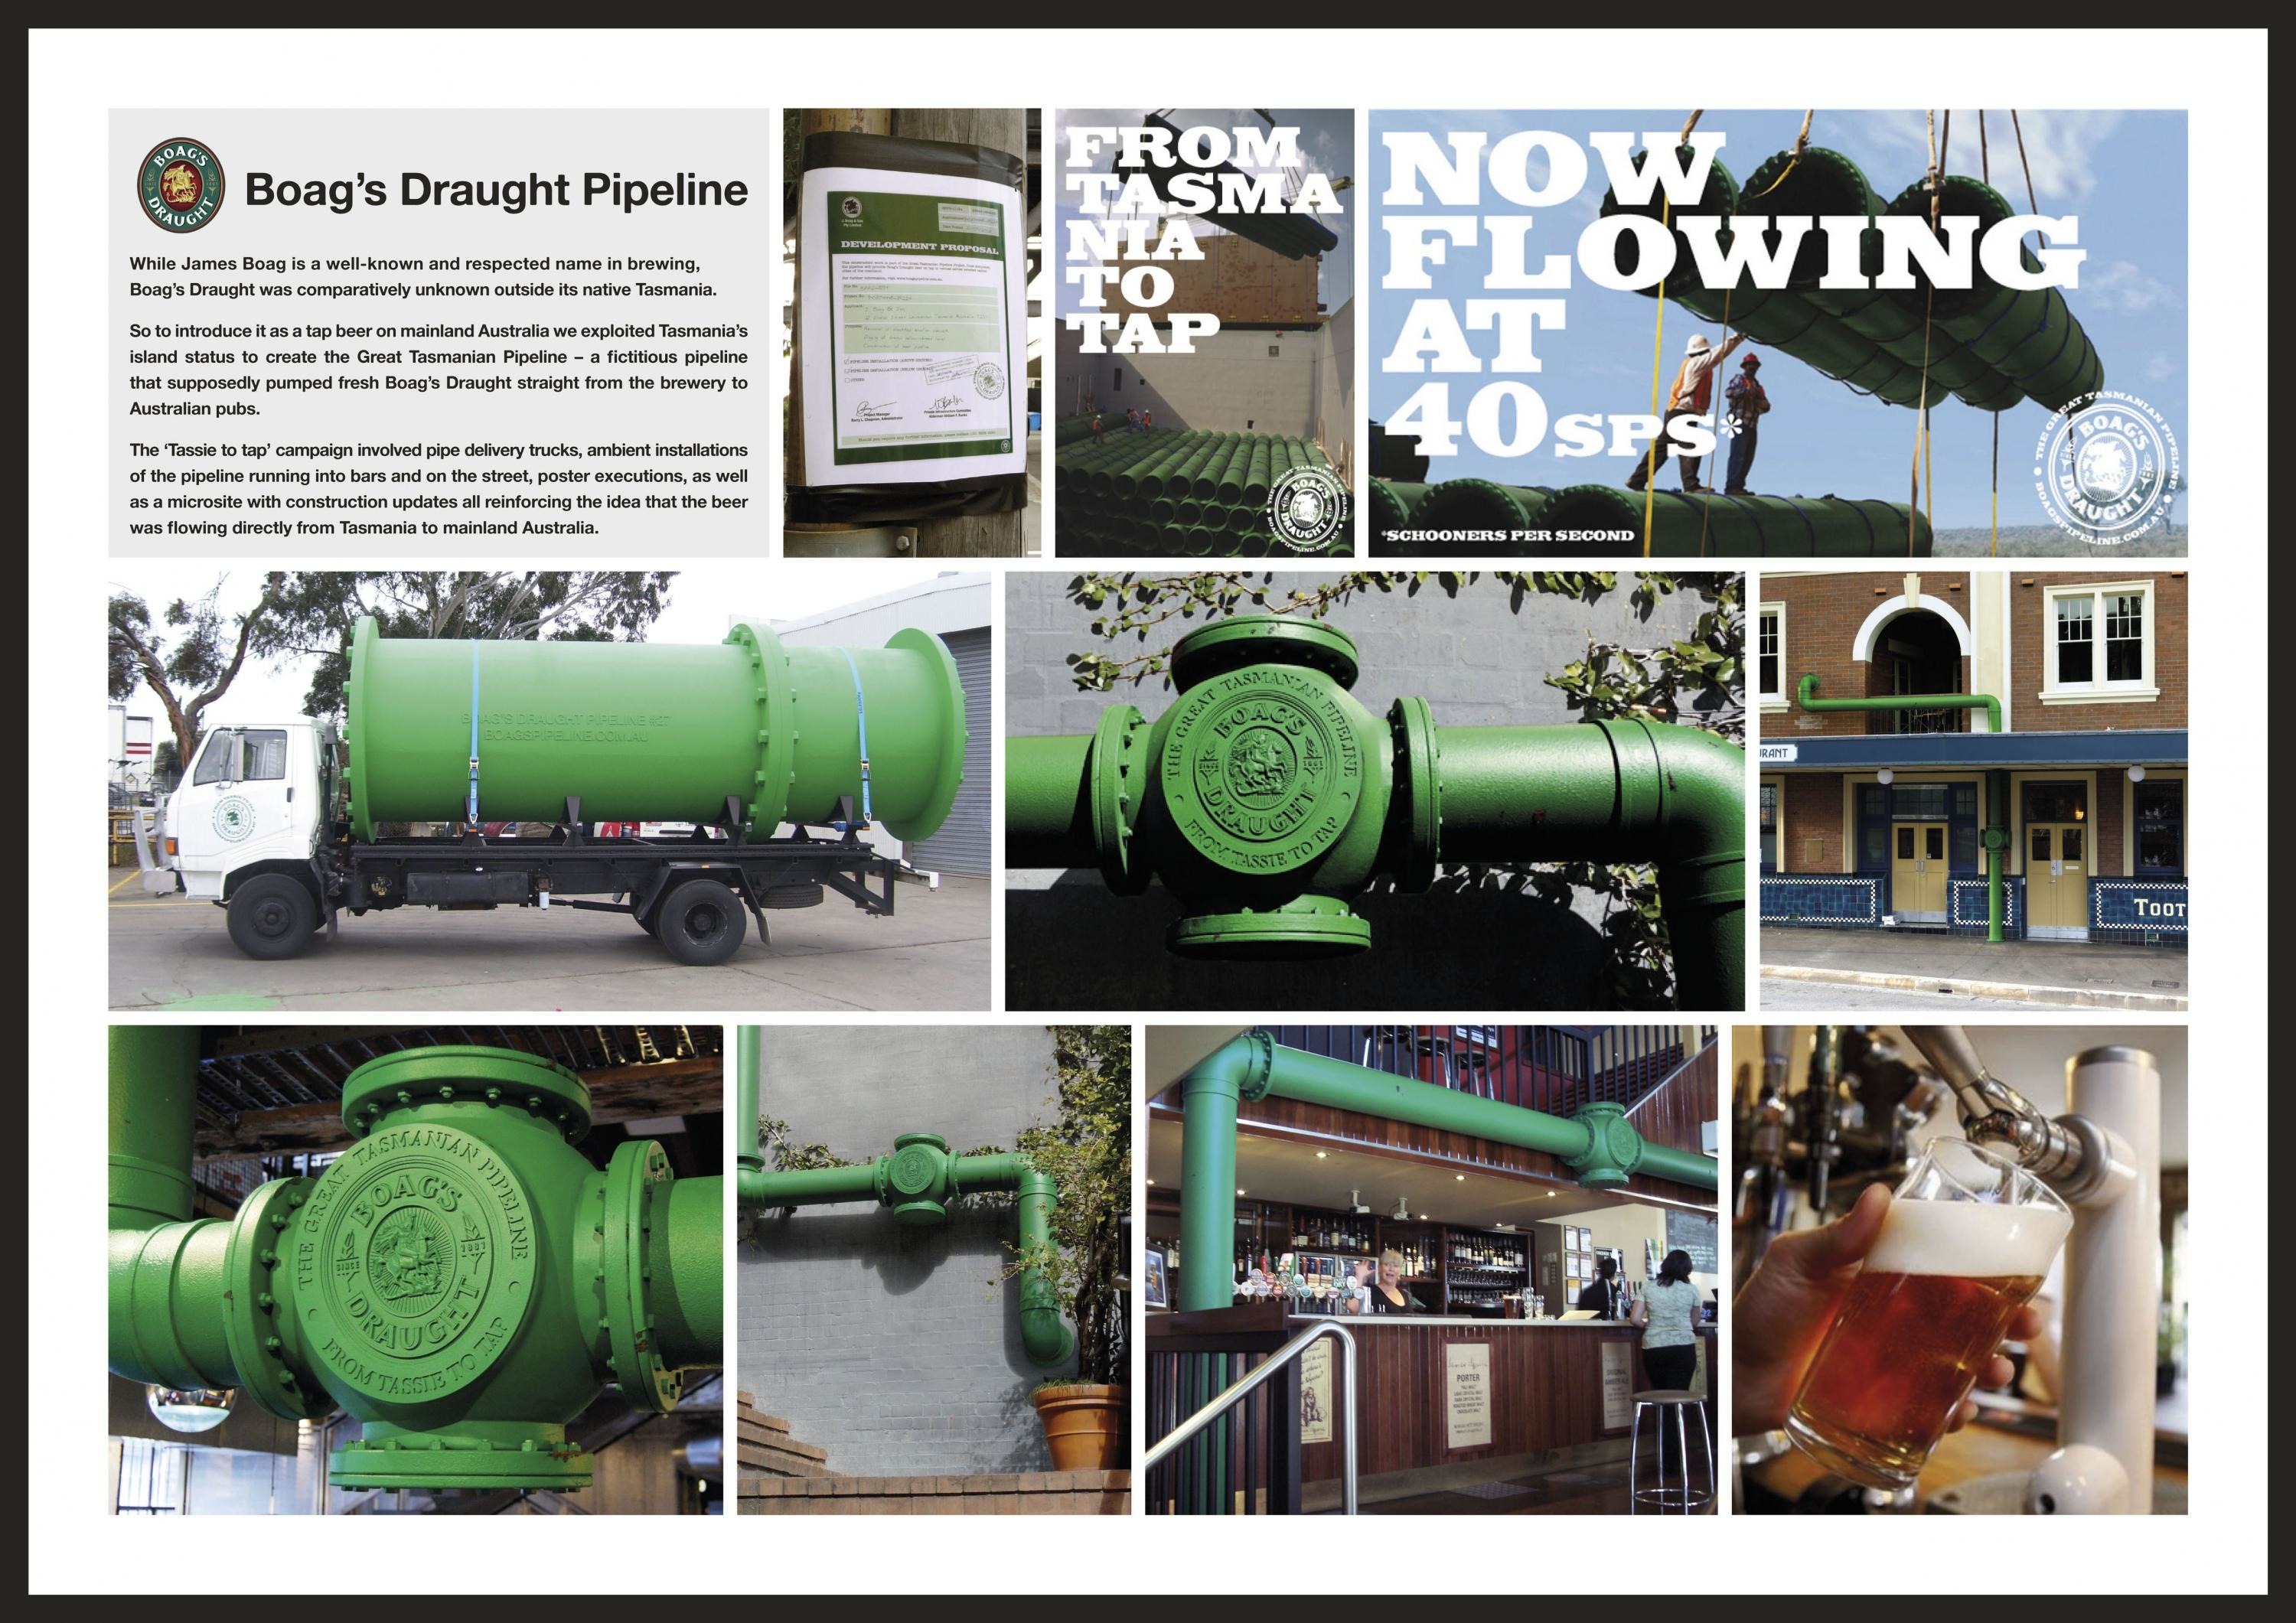 JAMES BOAGS DRAUGHT PIPELINE